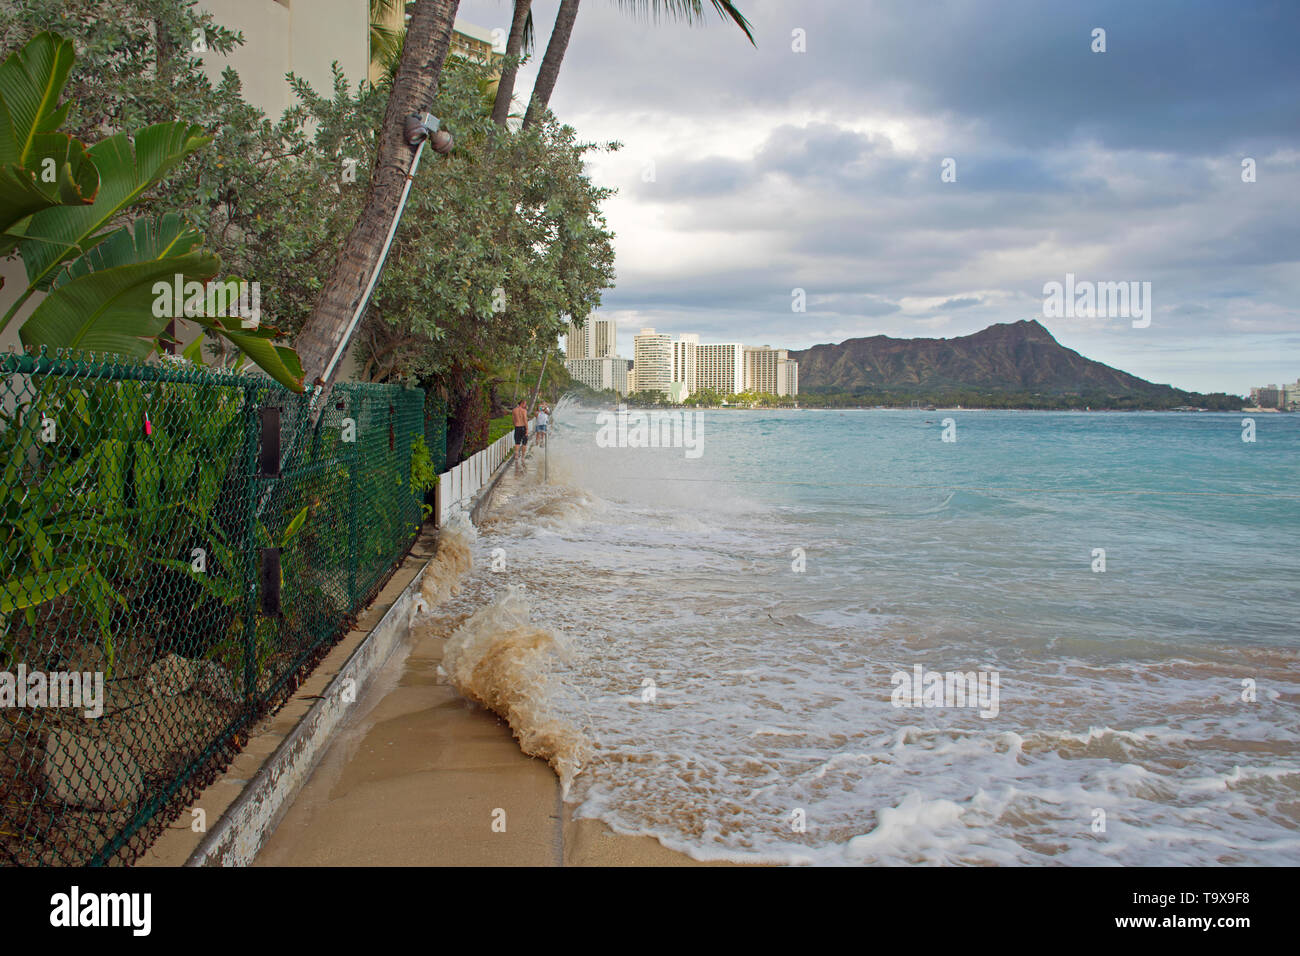 Record high tides or king tides in Waikiki Beach in May 2017, Oahu, Hawaii Stock Photo